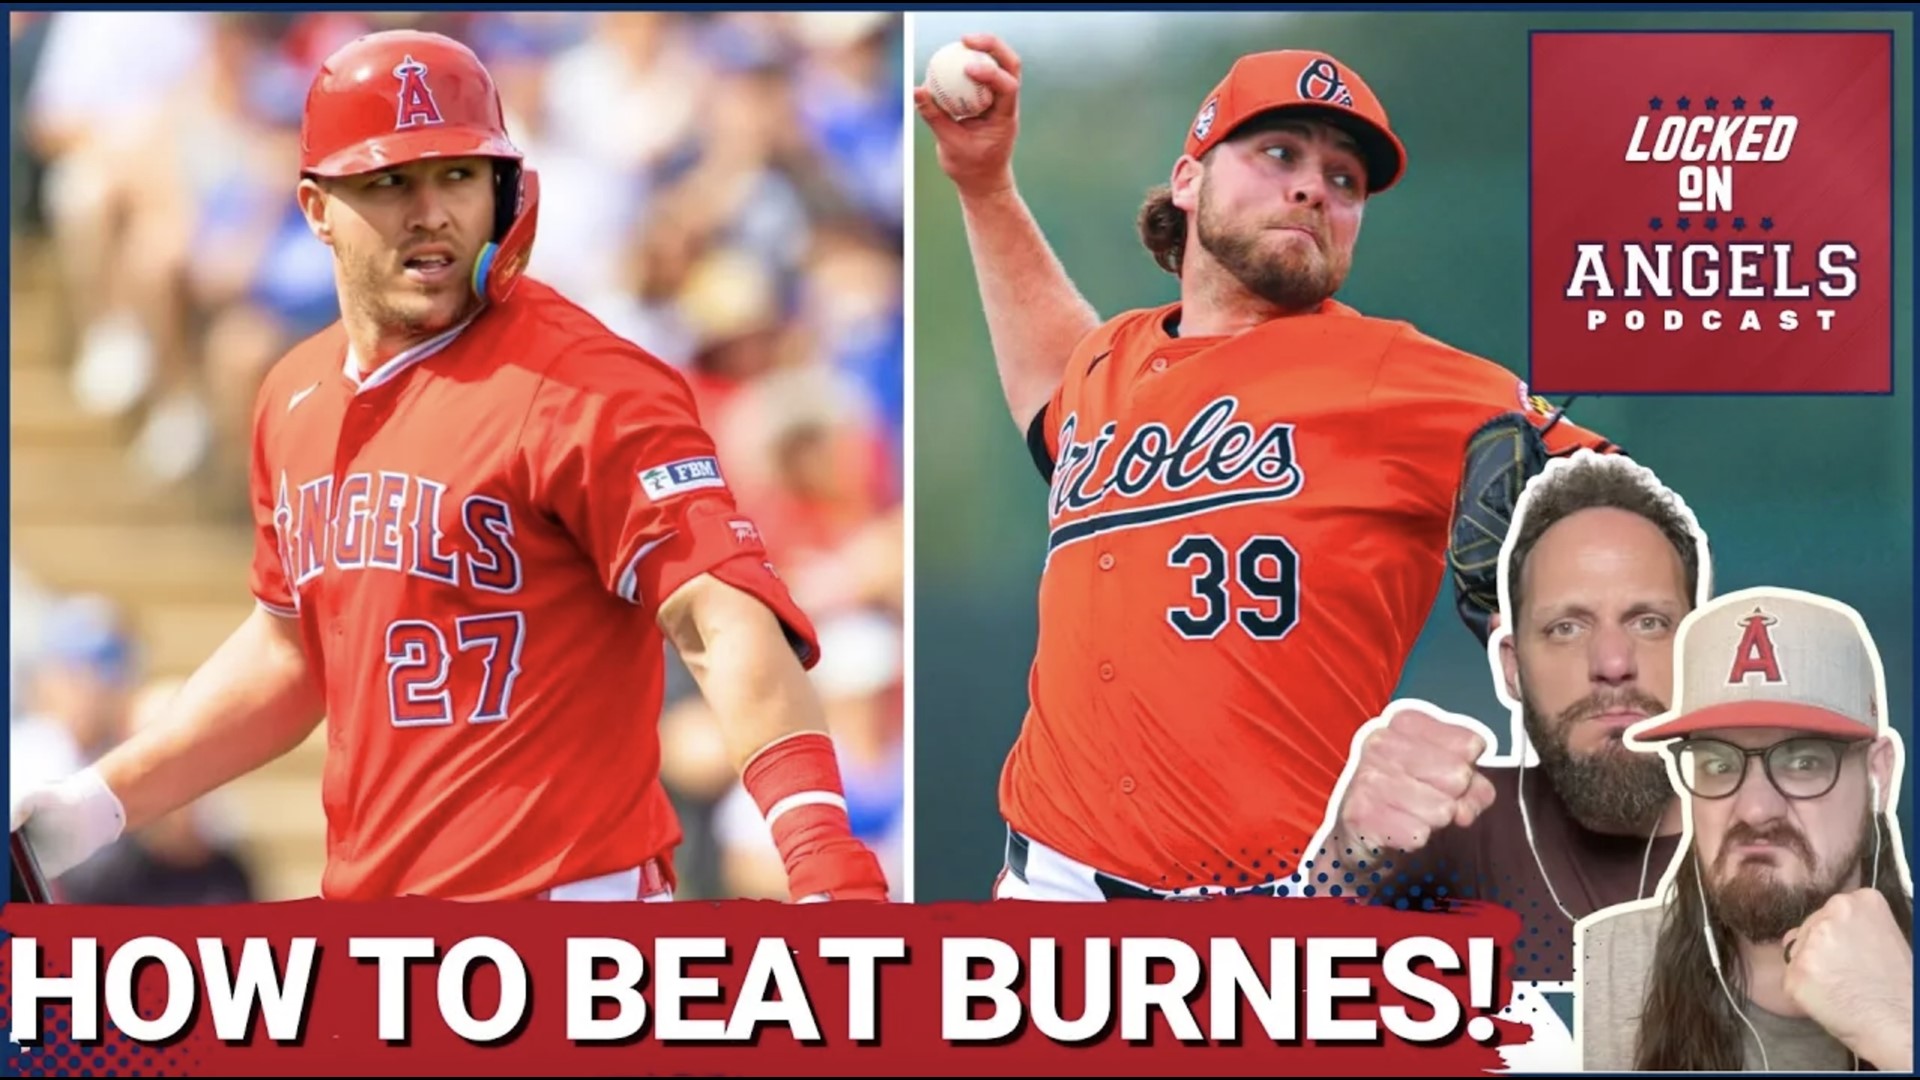 On today's Locked On Angels, we're talking about this big opening matchup against a team that won 101 games last year & added a true ace in the form of Corbin Burnes